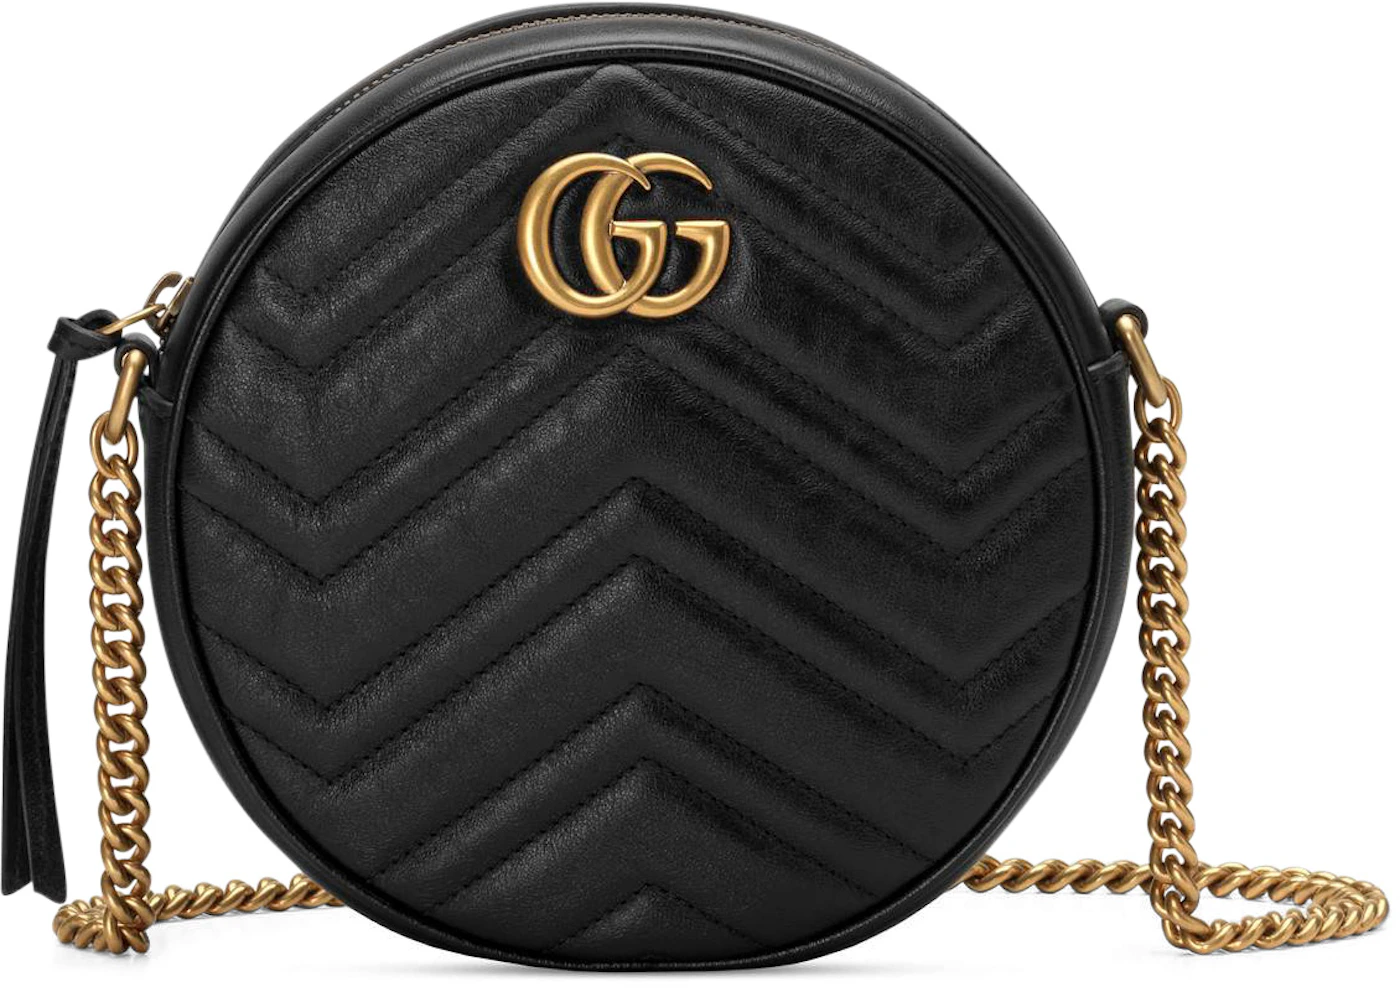 GG Marmont mini bag in black leather